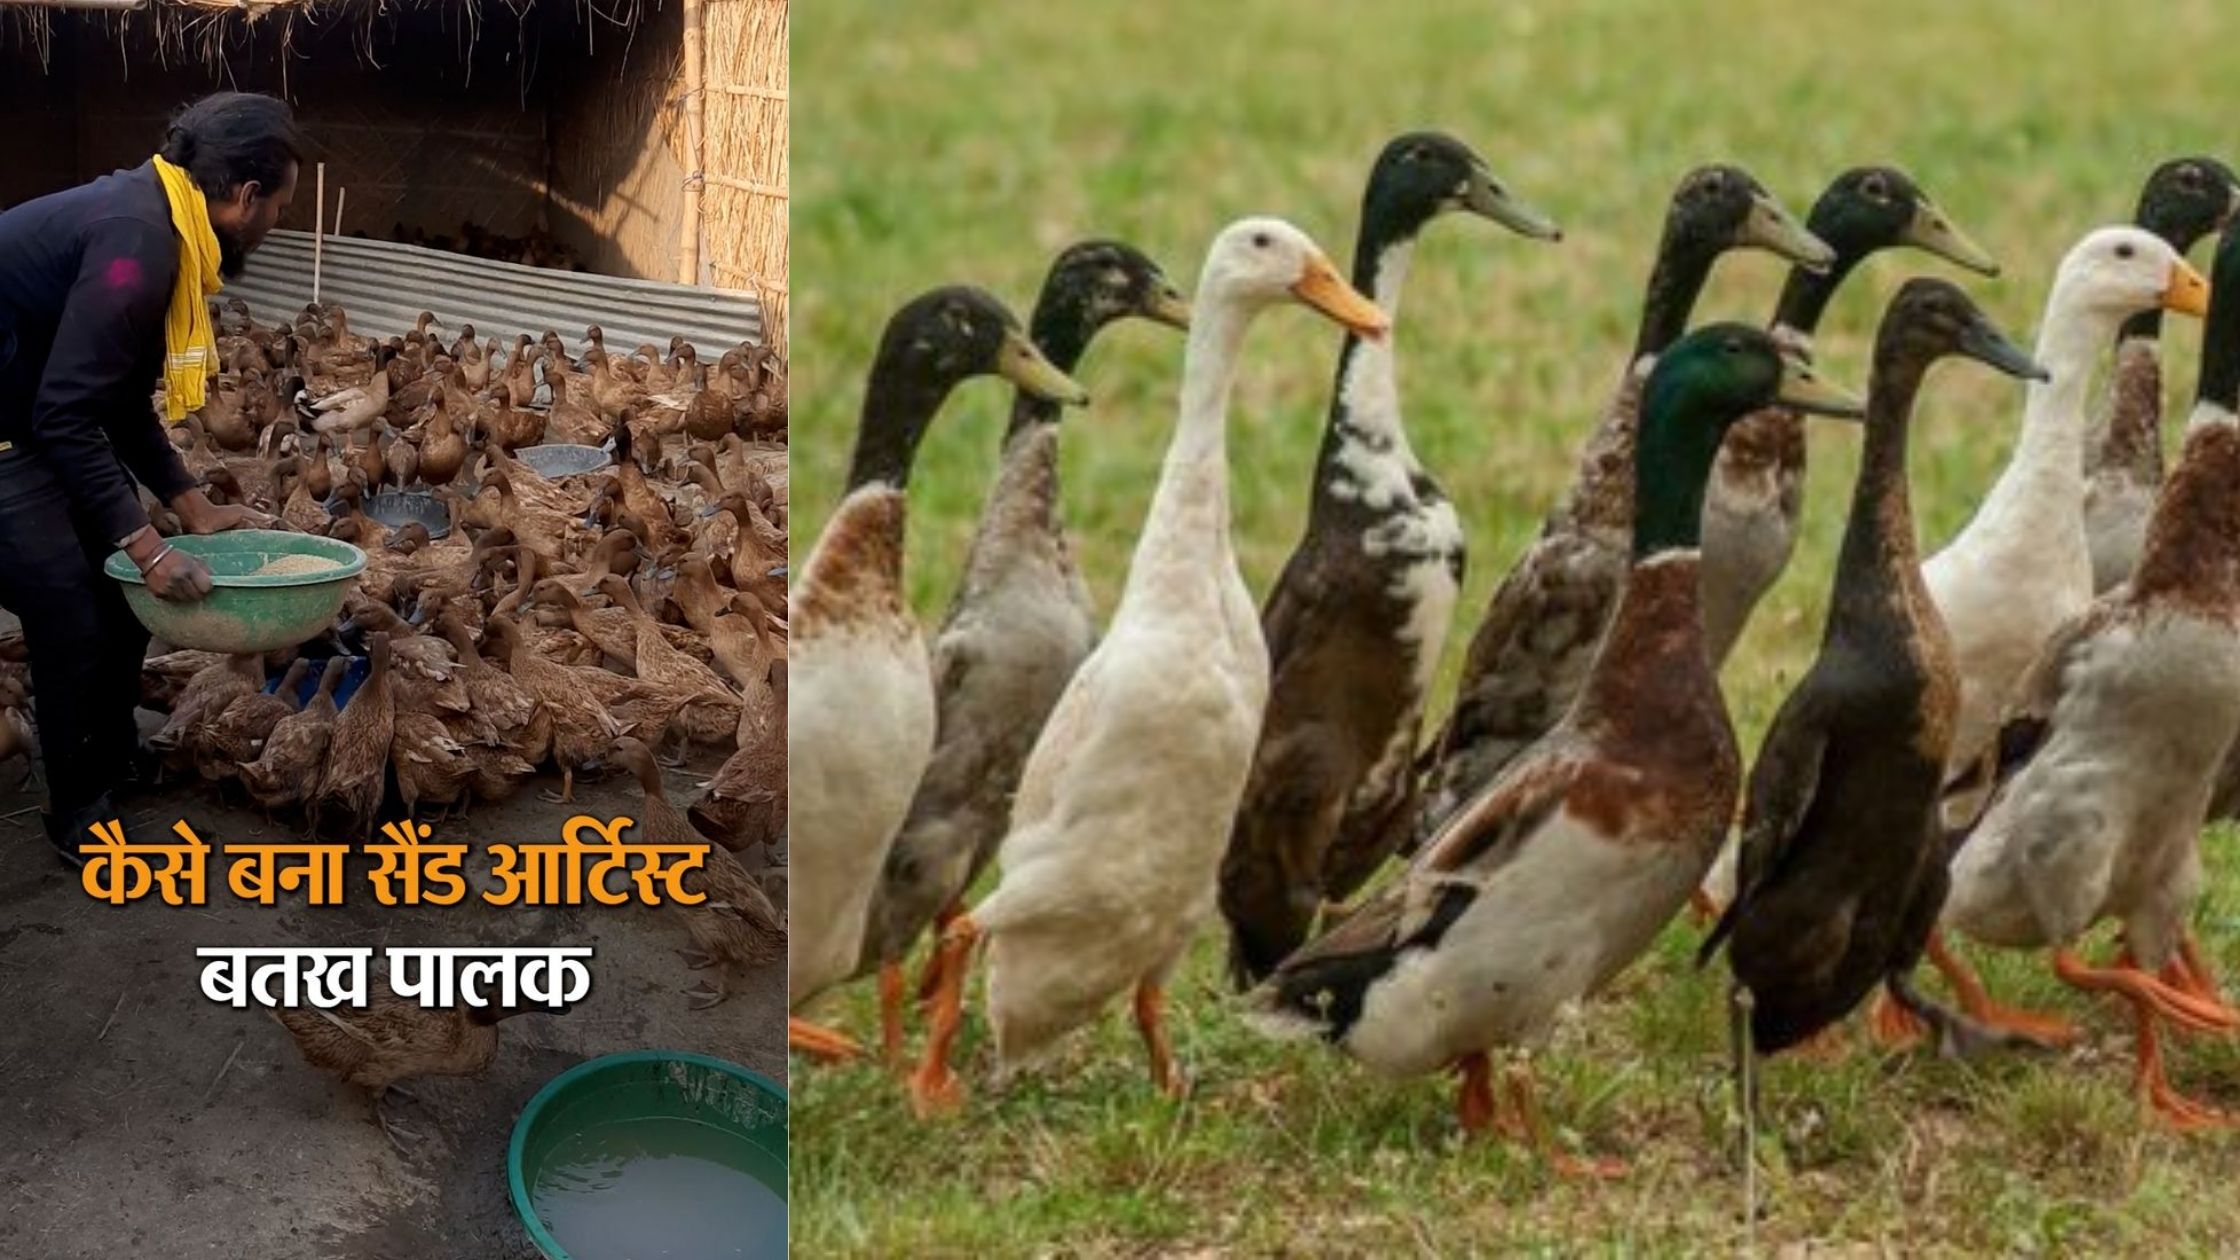 Story of becoming a duck keeper from sand artist of Bihar